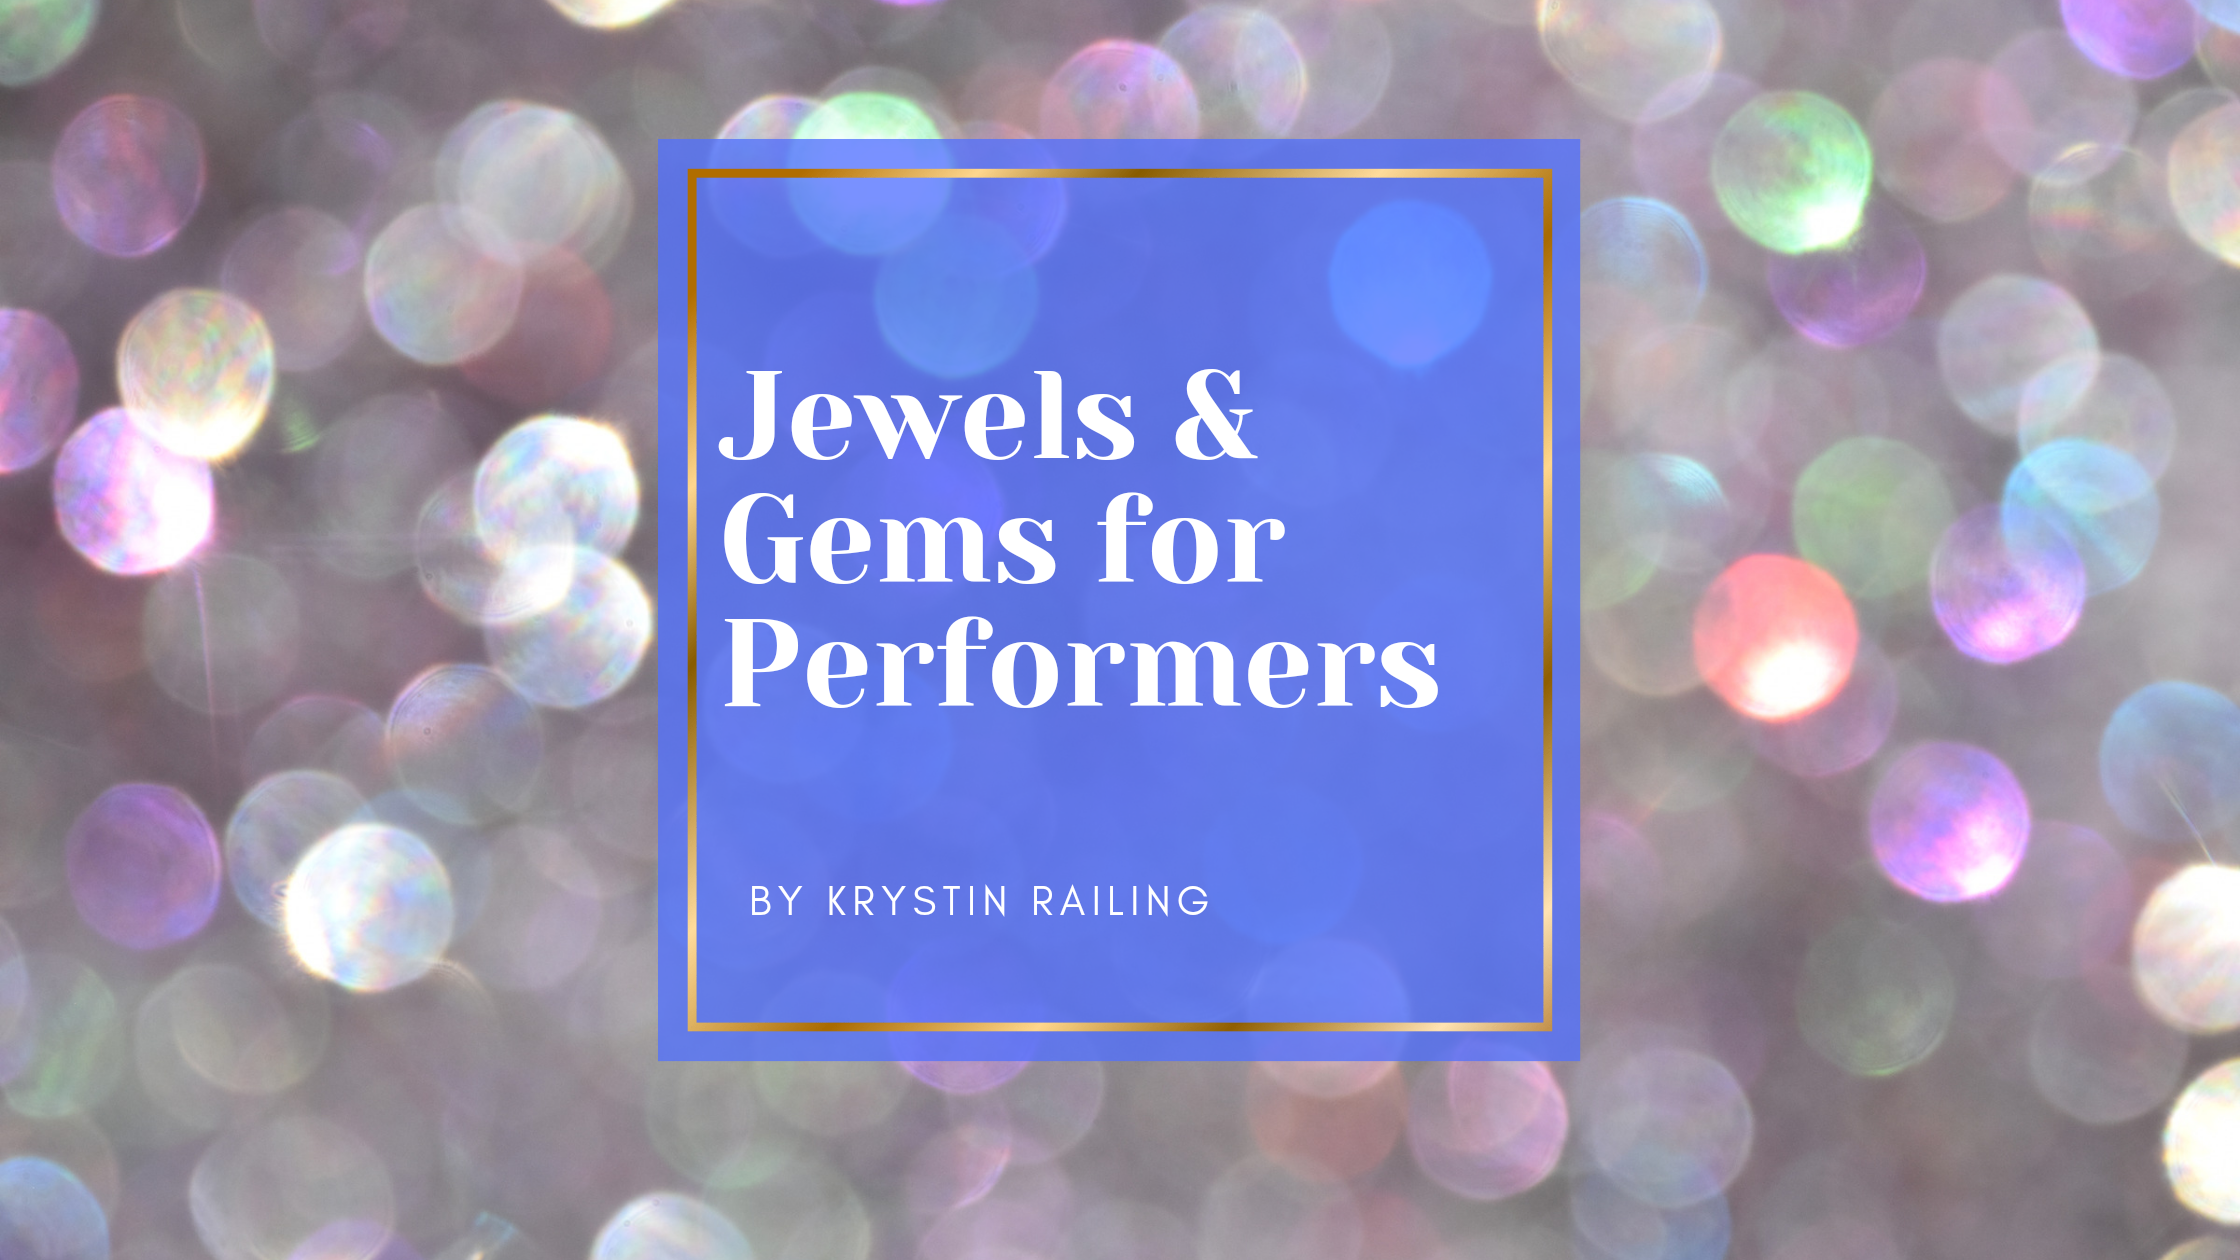 Jewels & Gems for Performers